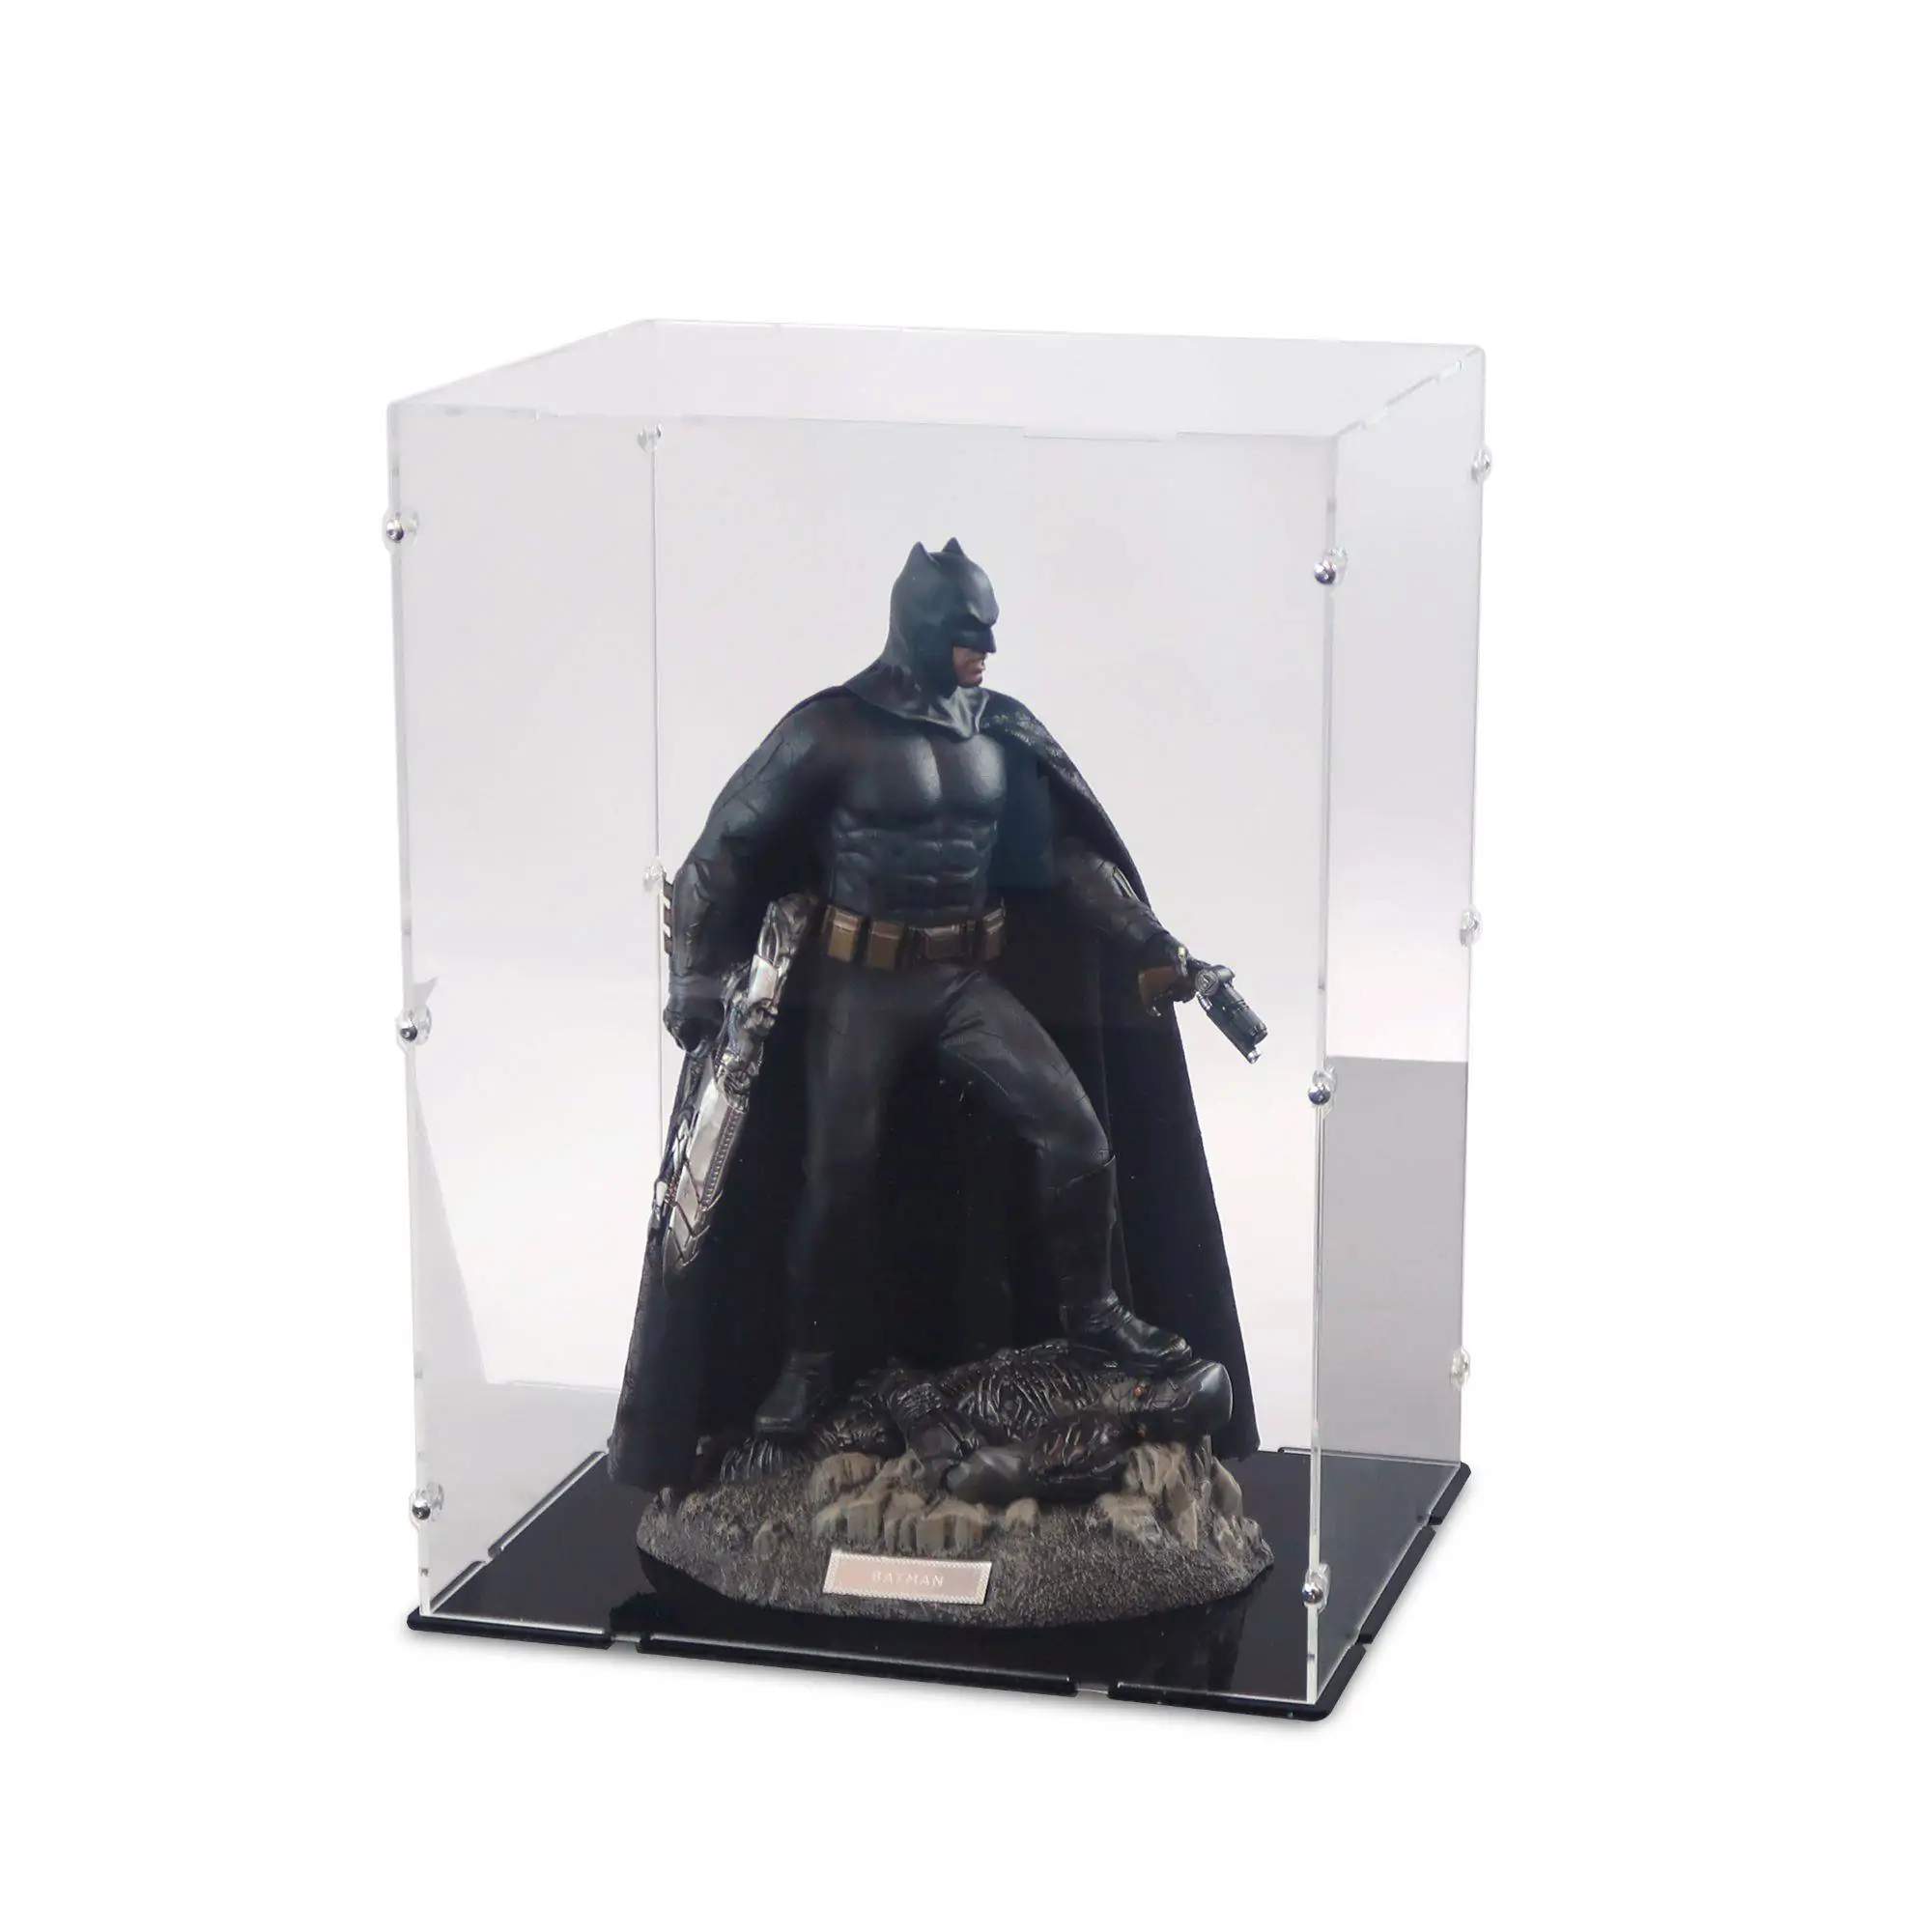 Acrylic Display Case for Hot Toys 1/6 Scale Batman Justice League